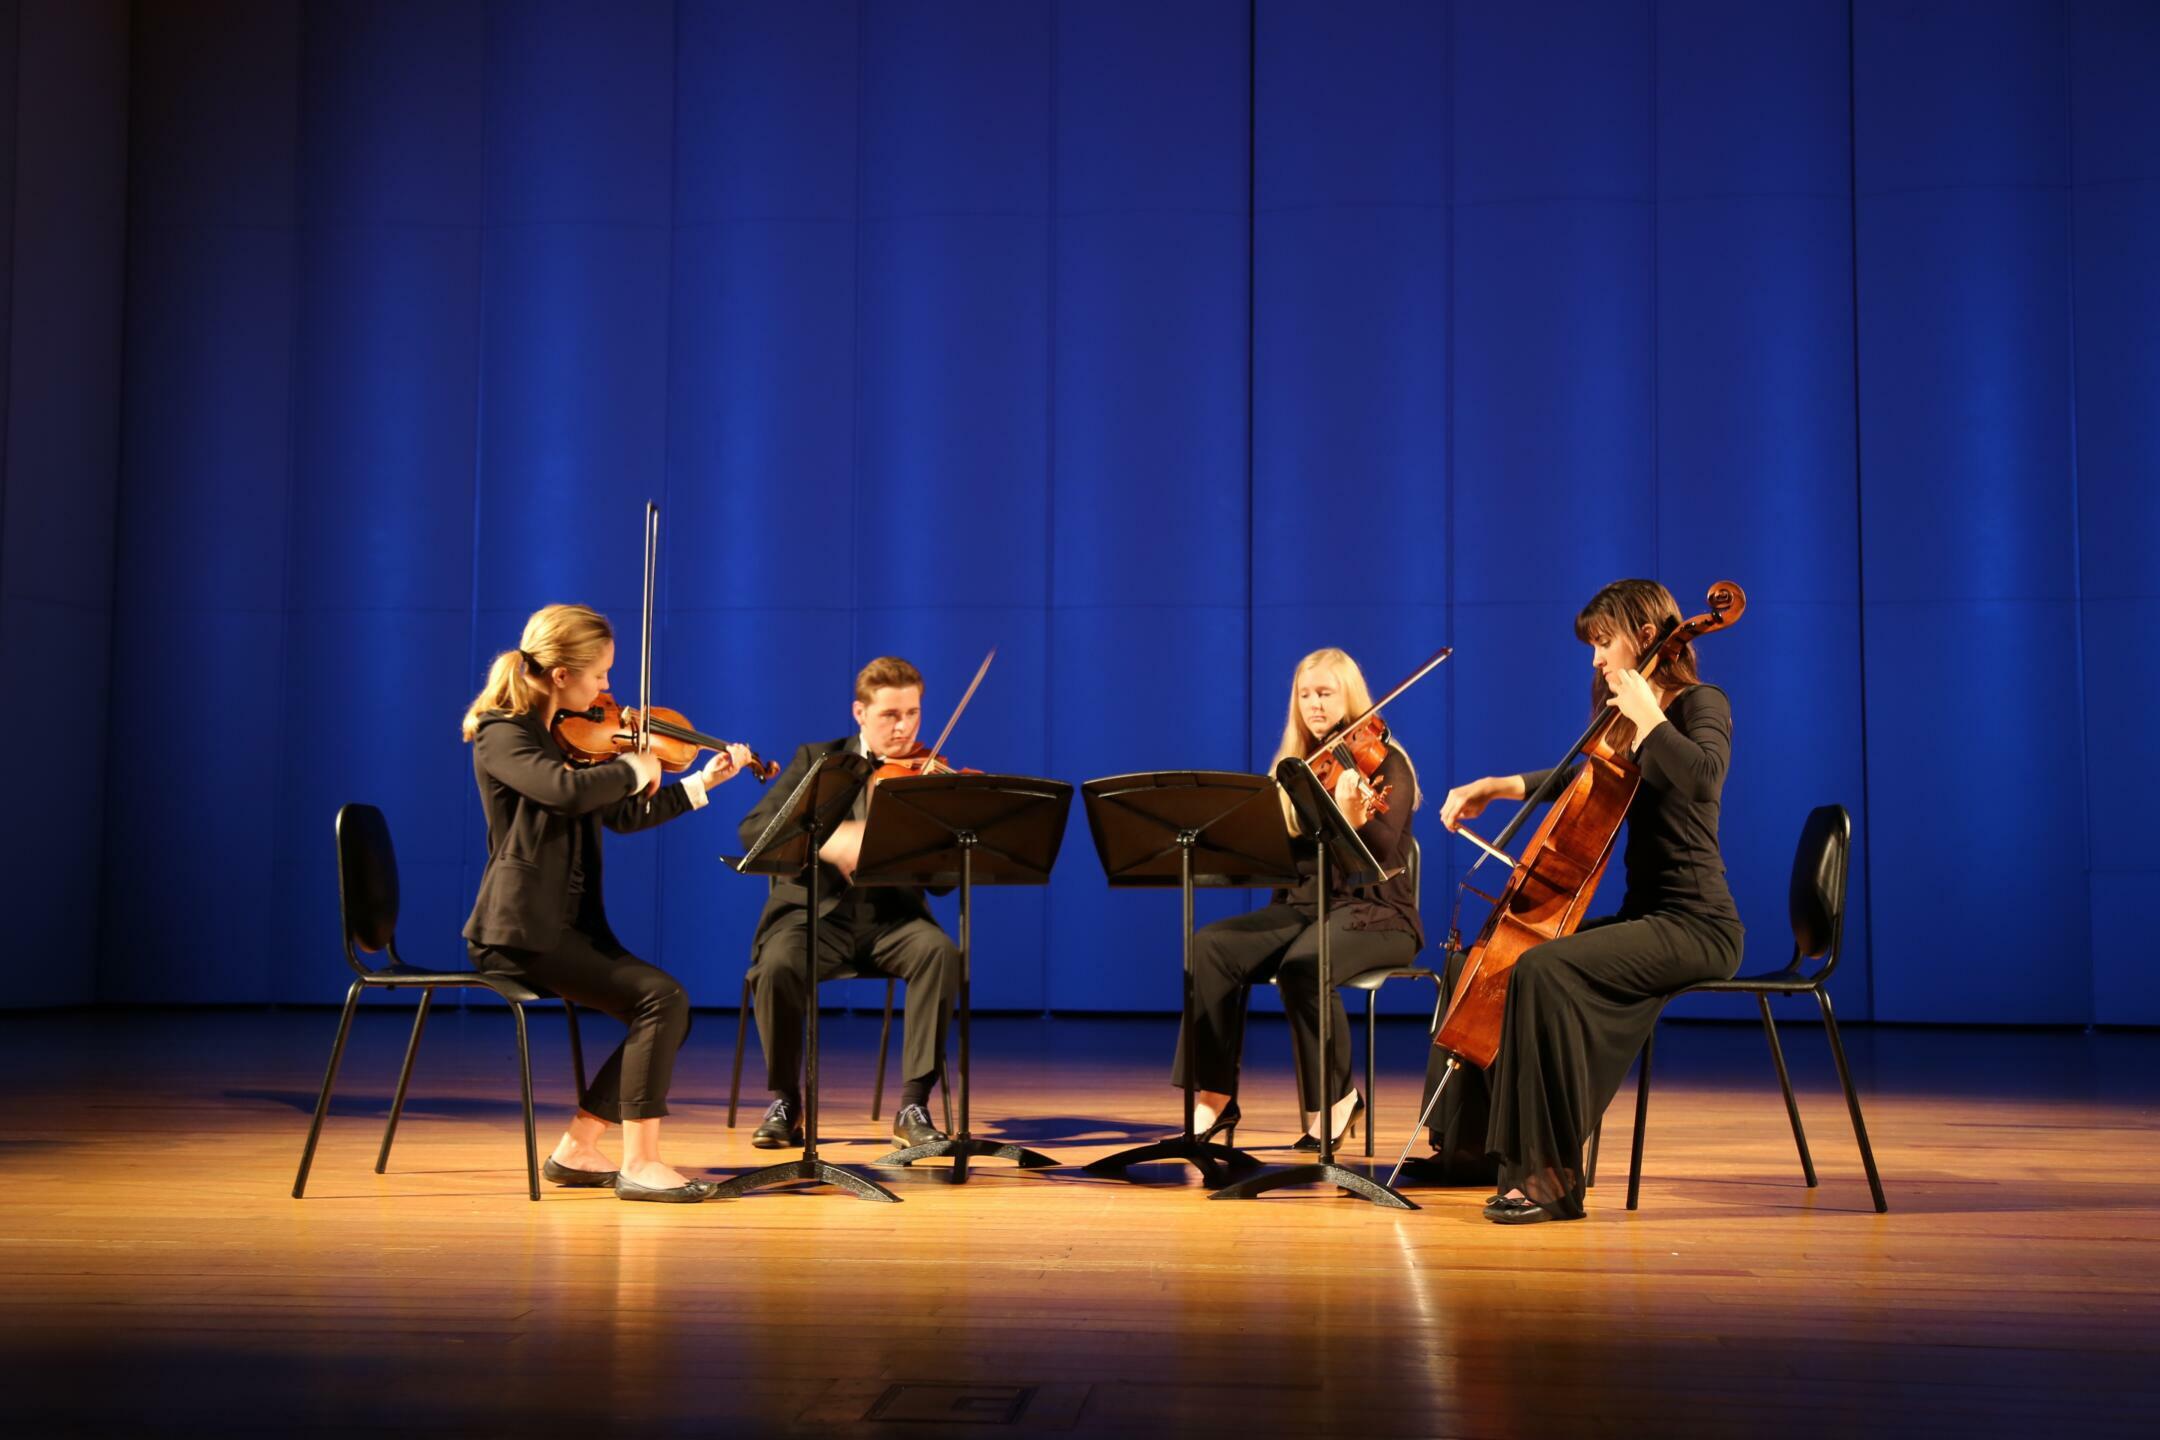 Small orchestra performing on stage